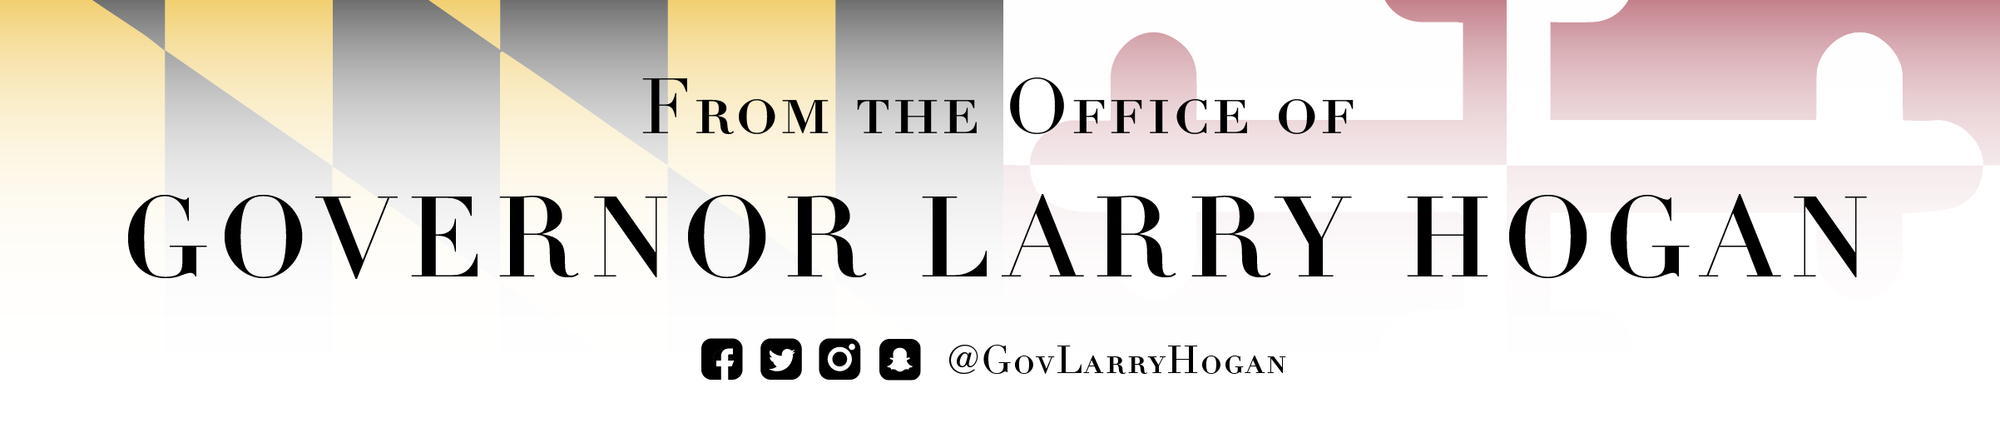 From the Office of Governor Larry Hogan